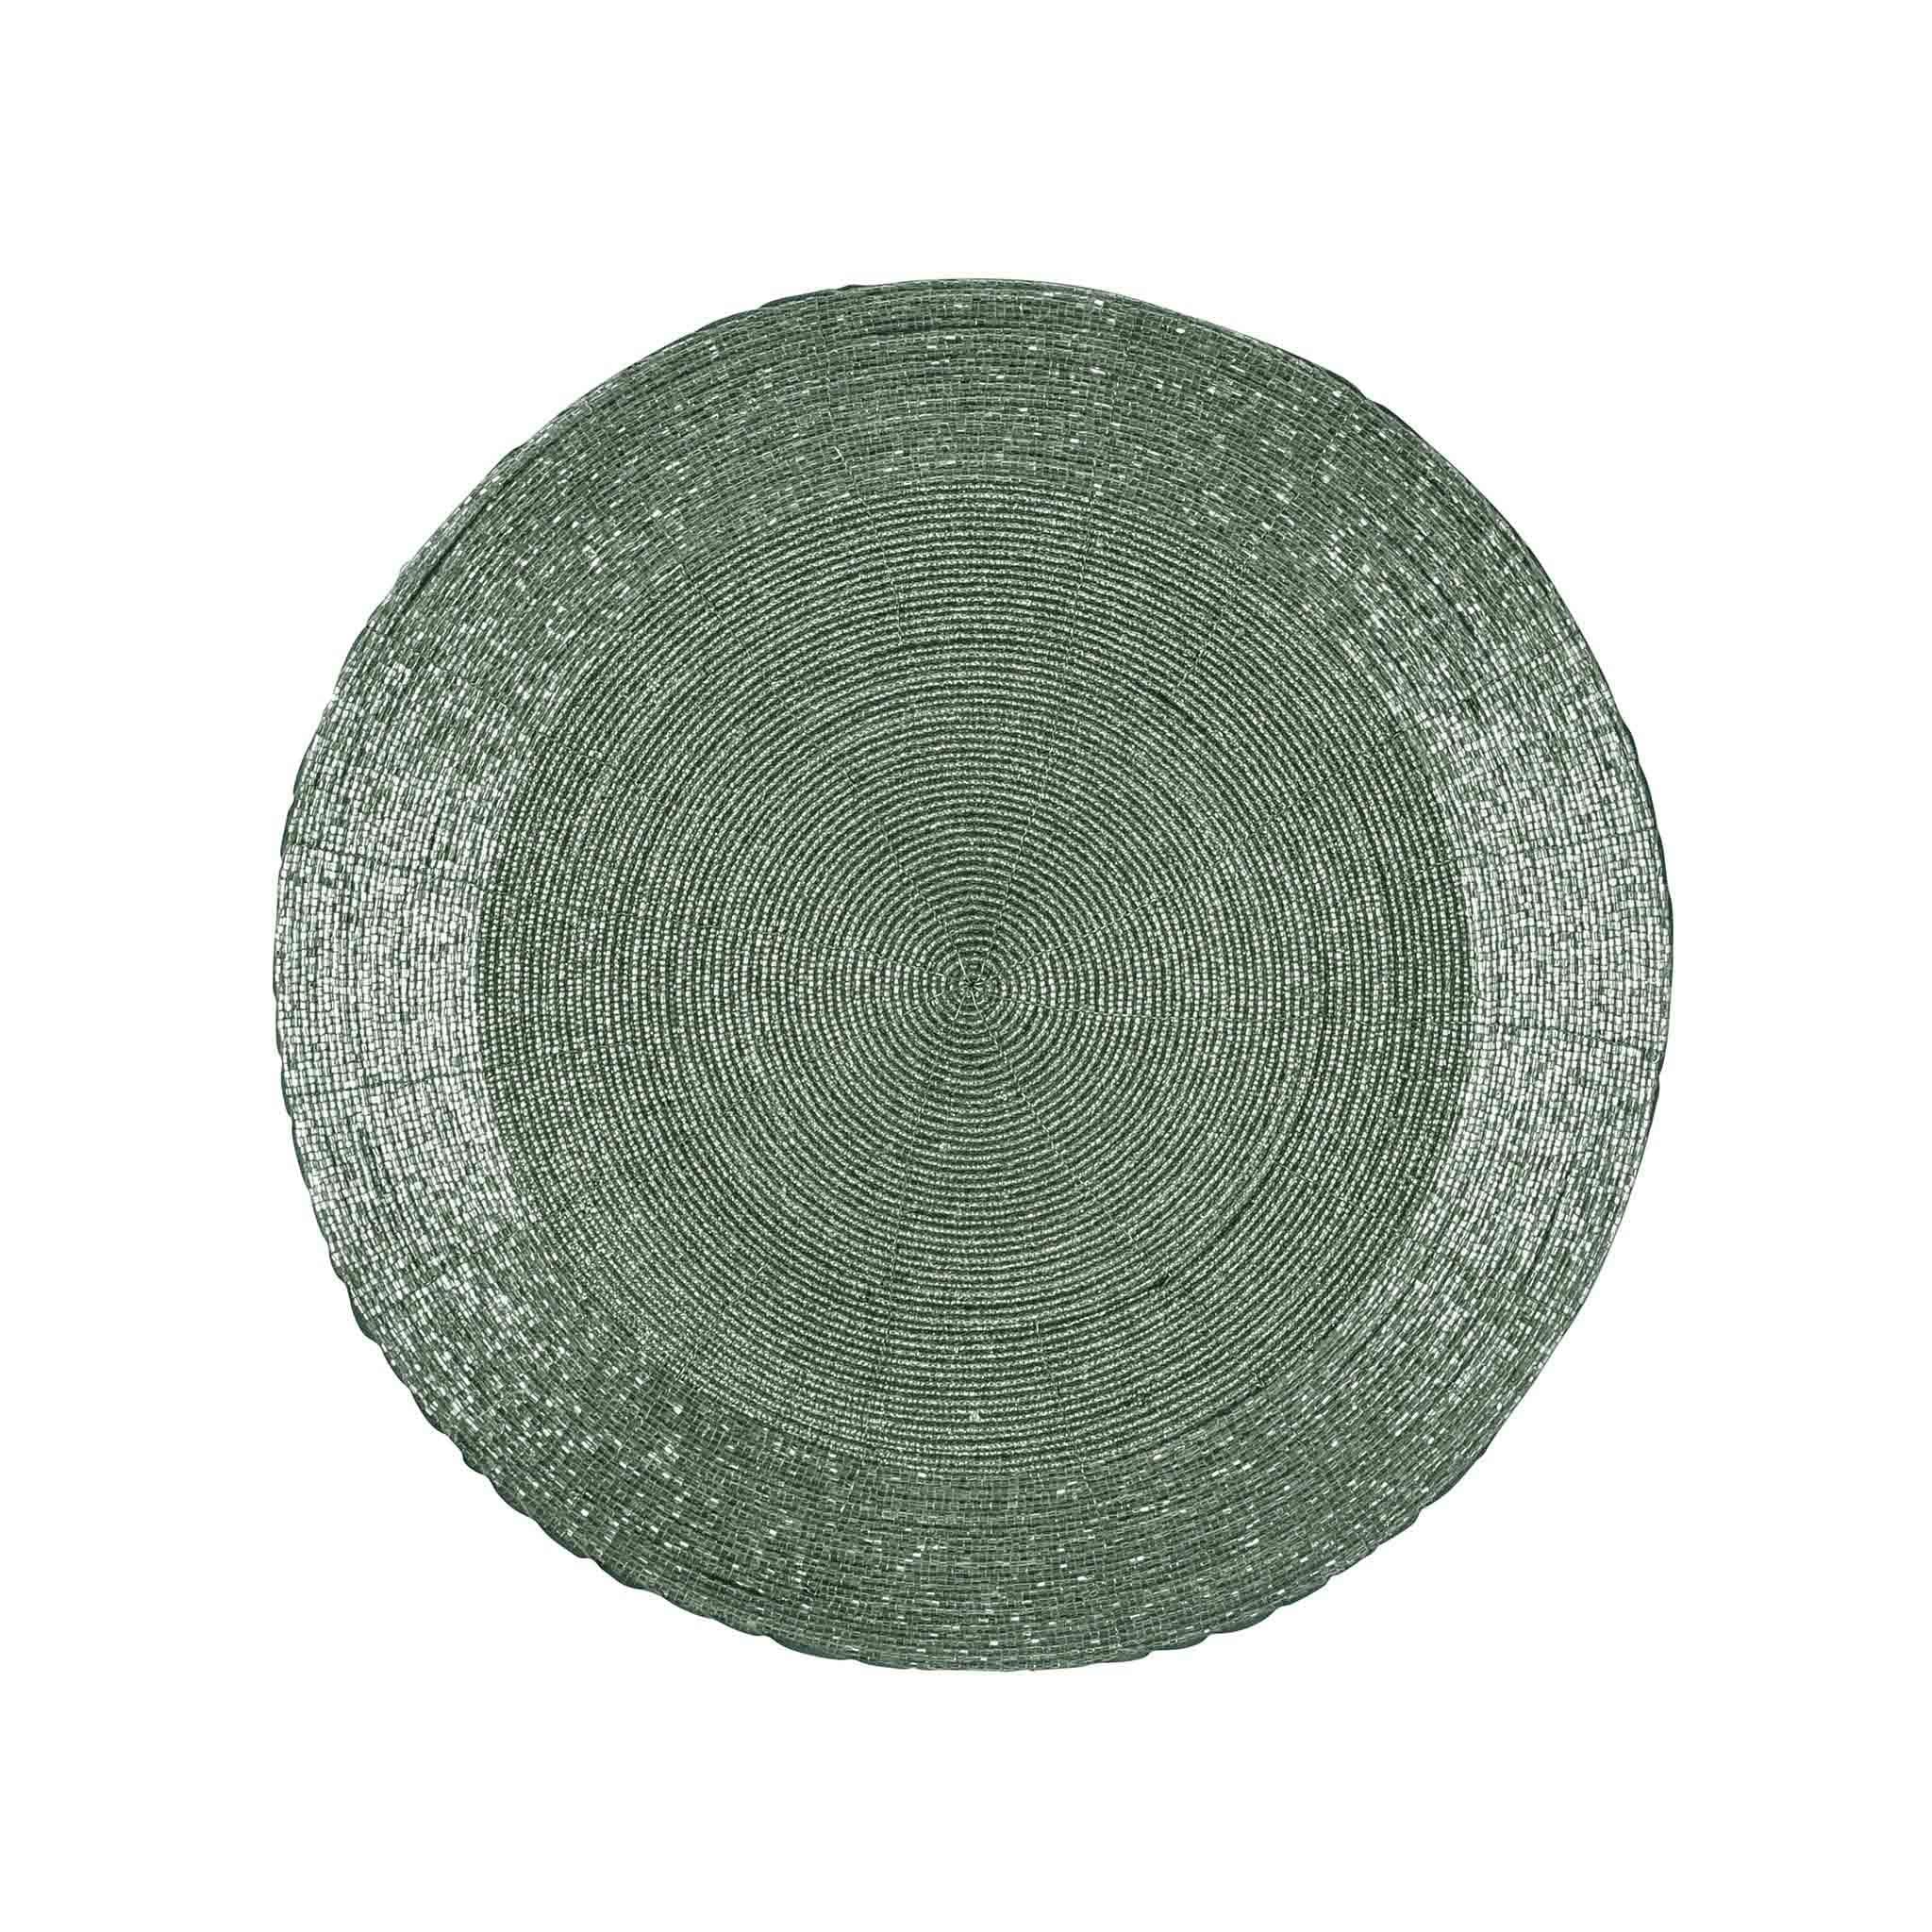 Glass Beaded Placemat <br>Color: Green  Two-Tone<br>Size: 14" Round<br>Set of 4 - Trunkin' USA